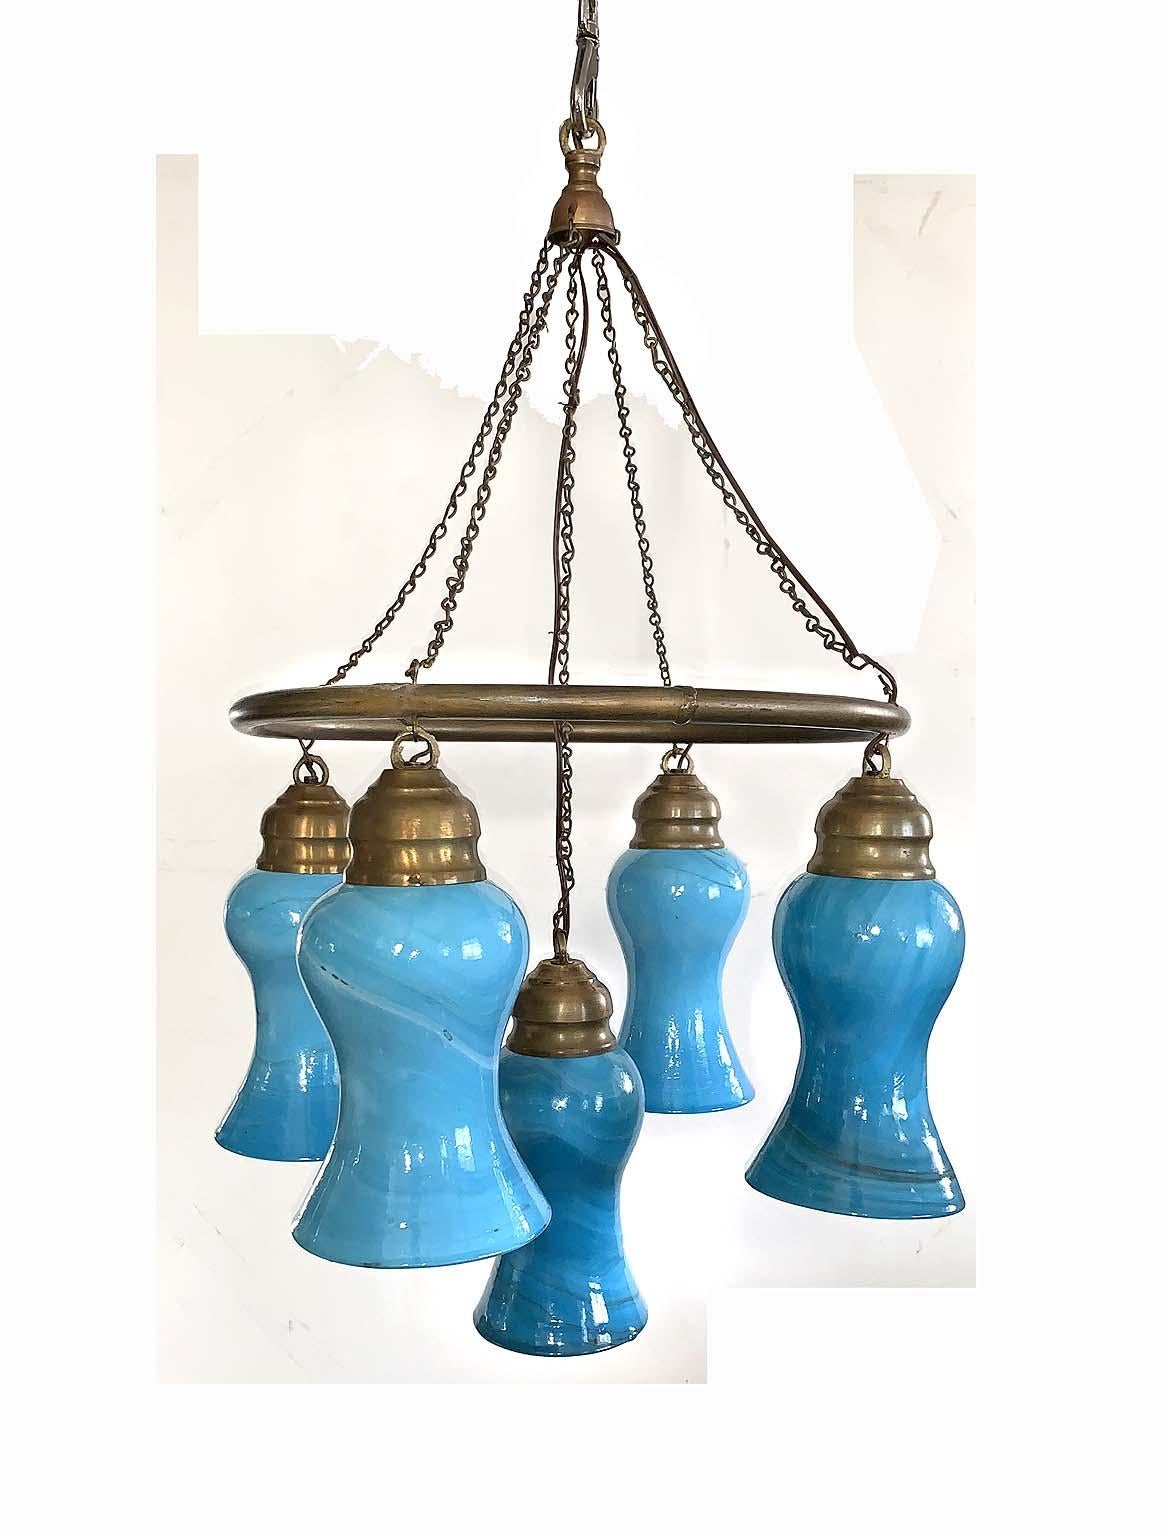 Amazing Egyptian glass chandelier. Five drop large hand blown blue glass with a brushed brass ring and chain. Amazing look and can be custom made in multiple sizes and colors. In the world of original lighting you will not find many options of this